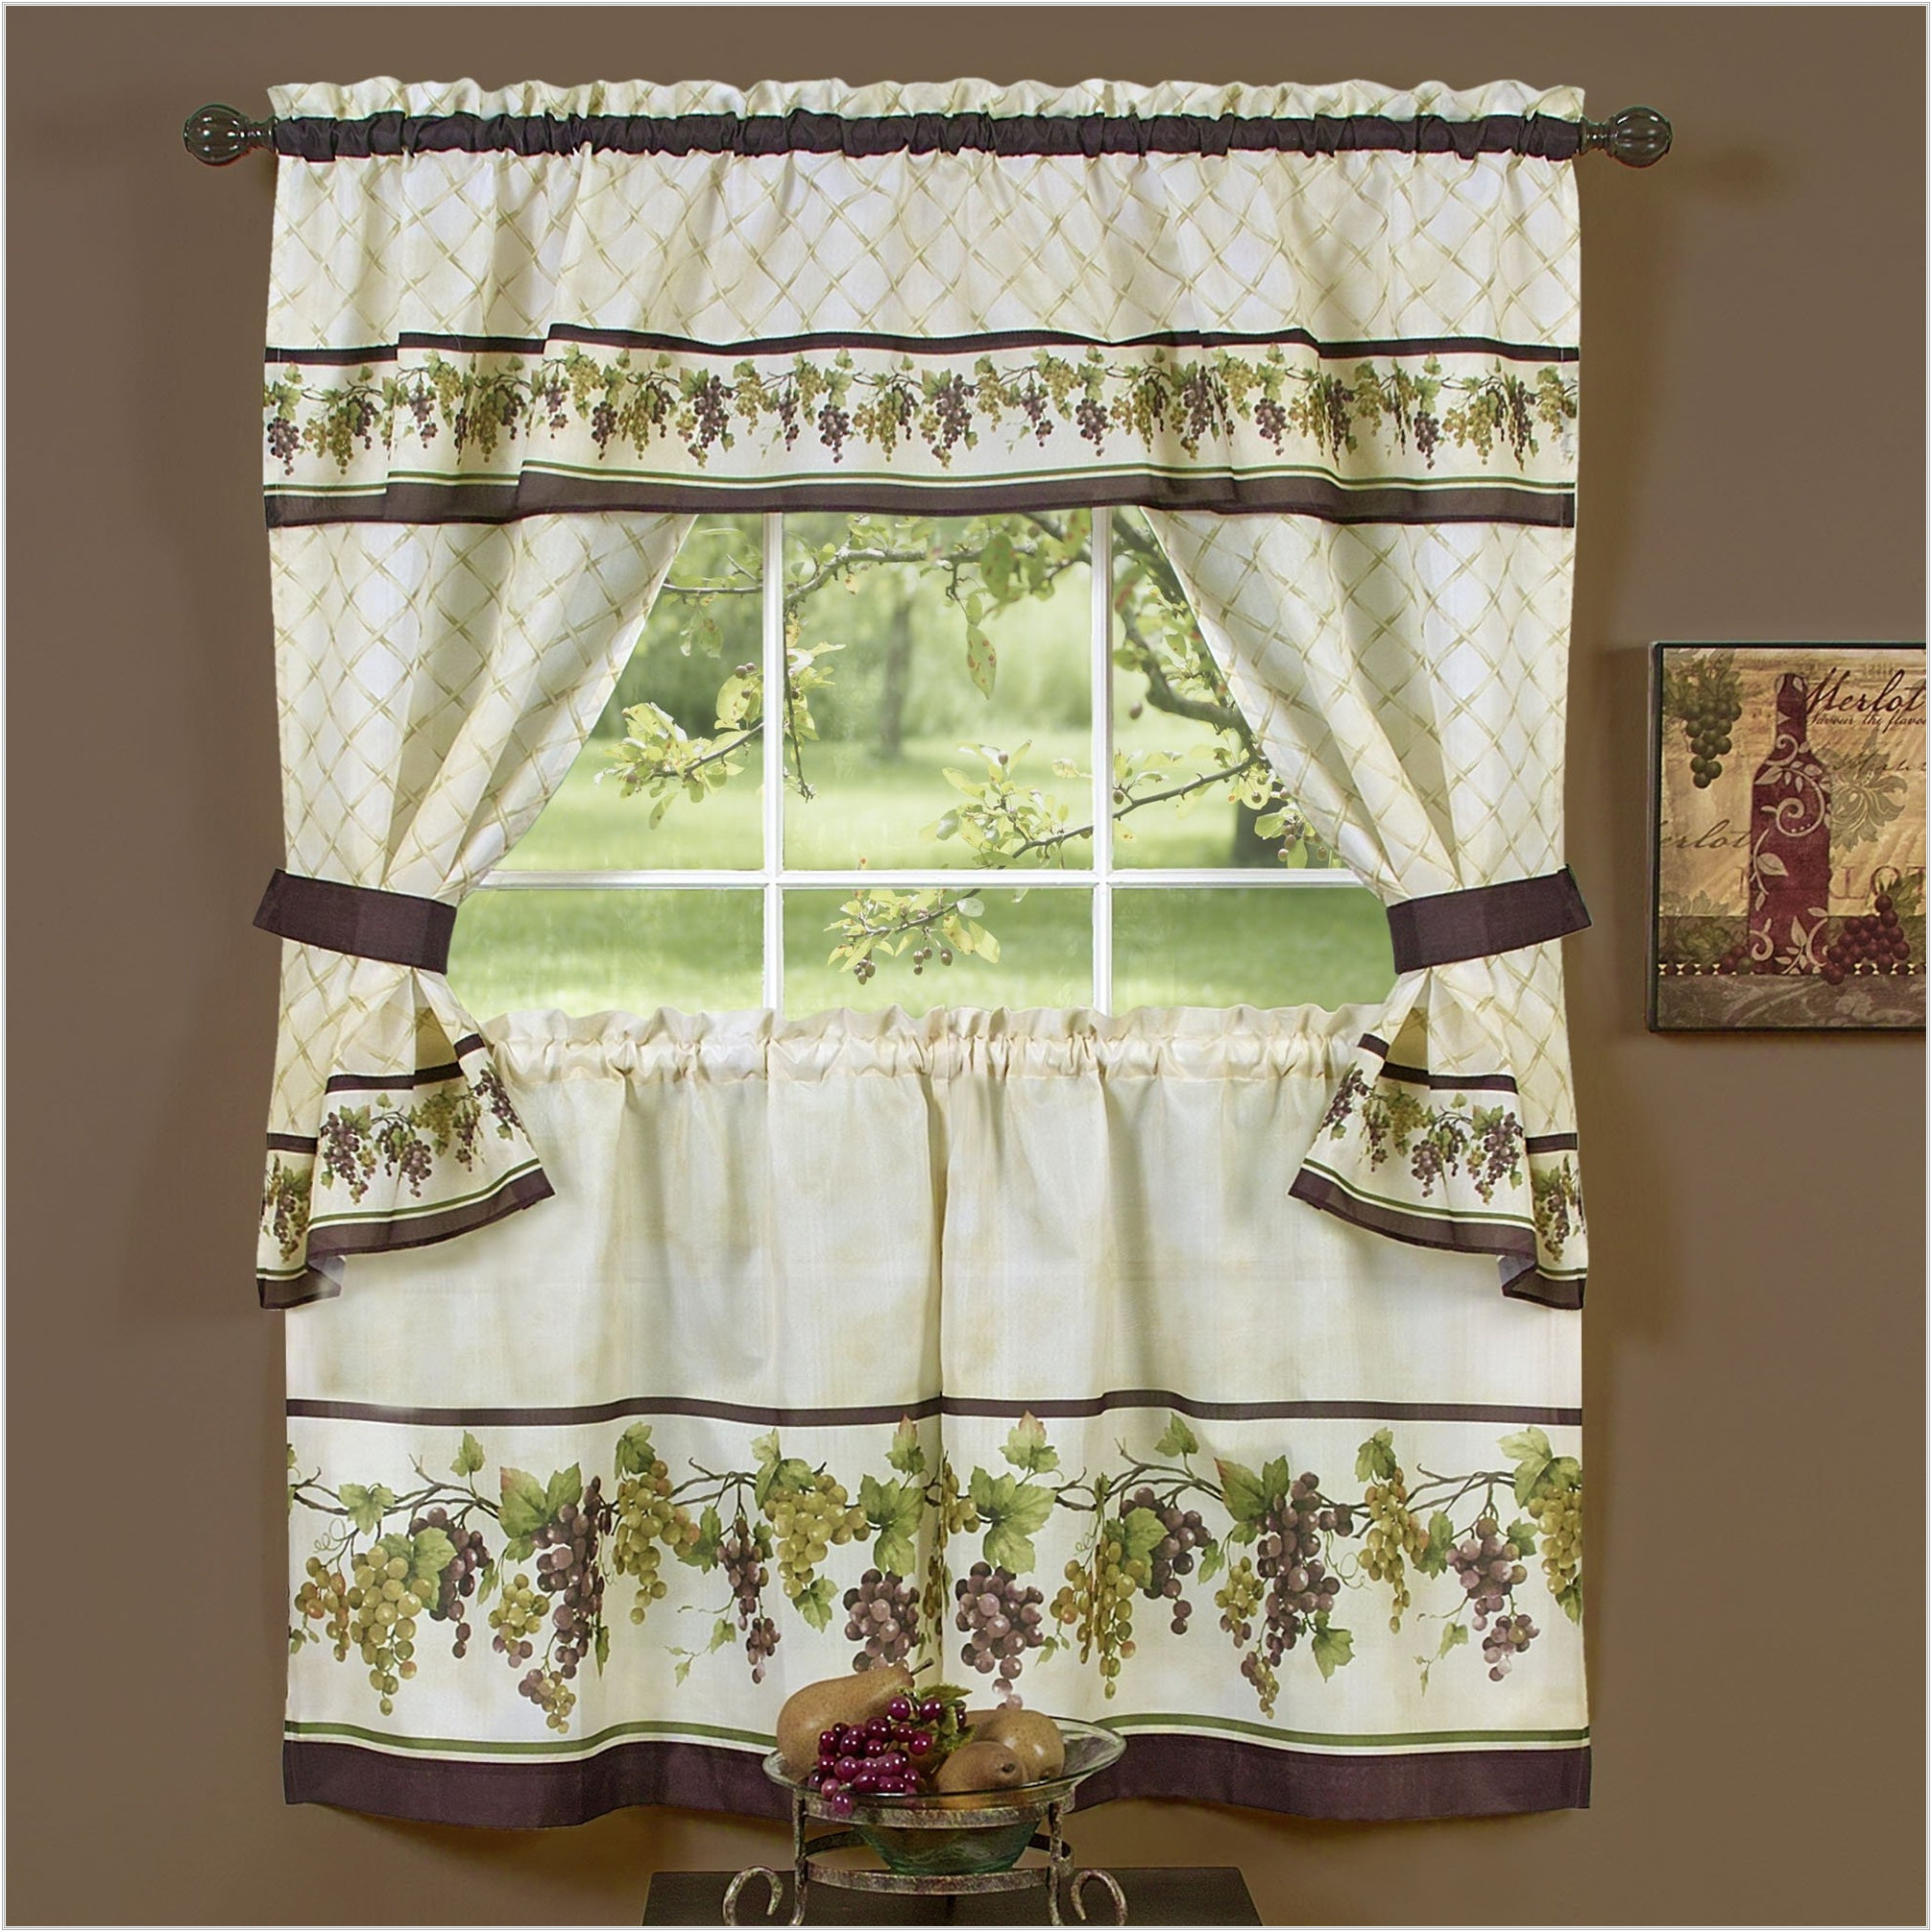 Jcpenney Curtains Kitchen
 Curtain Enchanting Jcpenney Valances Curtains For Window